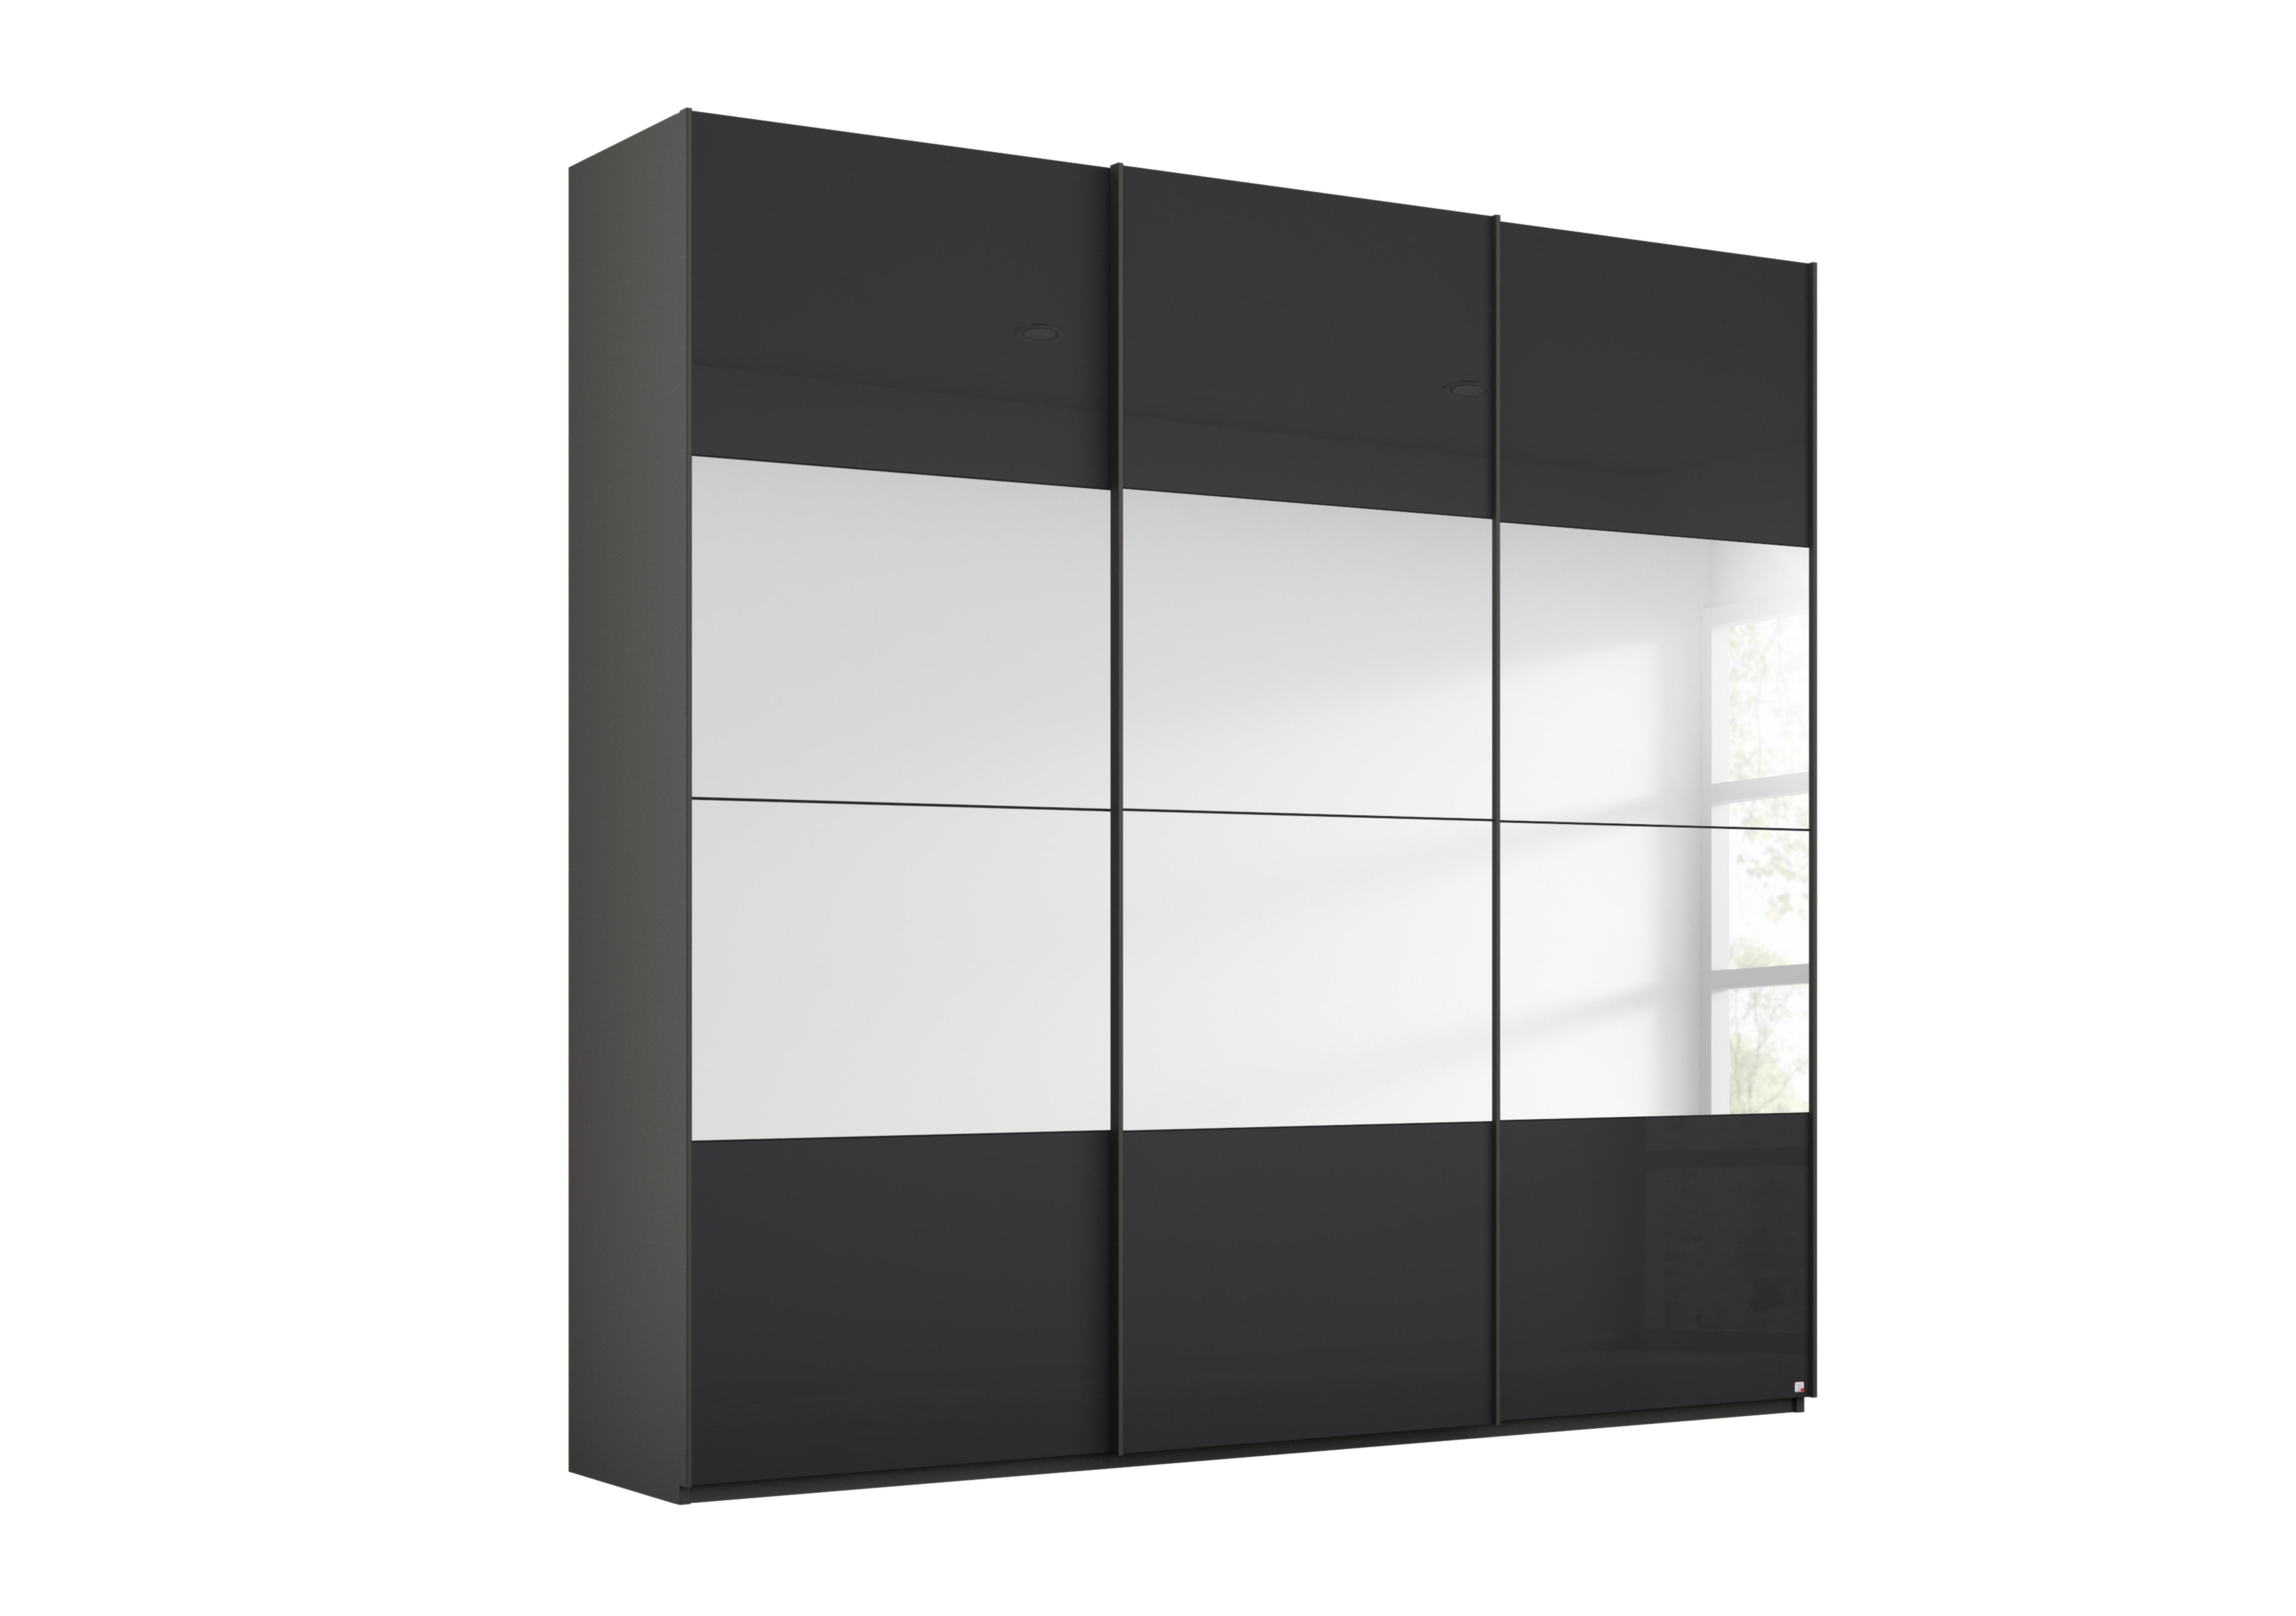 Formes Glass 3 Door Sliding Wardrobe with Horizontal Mirrors in A140b Graphite Basalt Front on Furniture Village